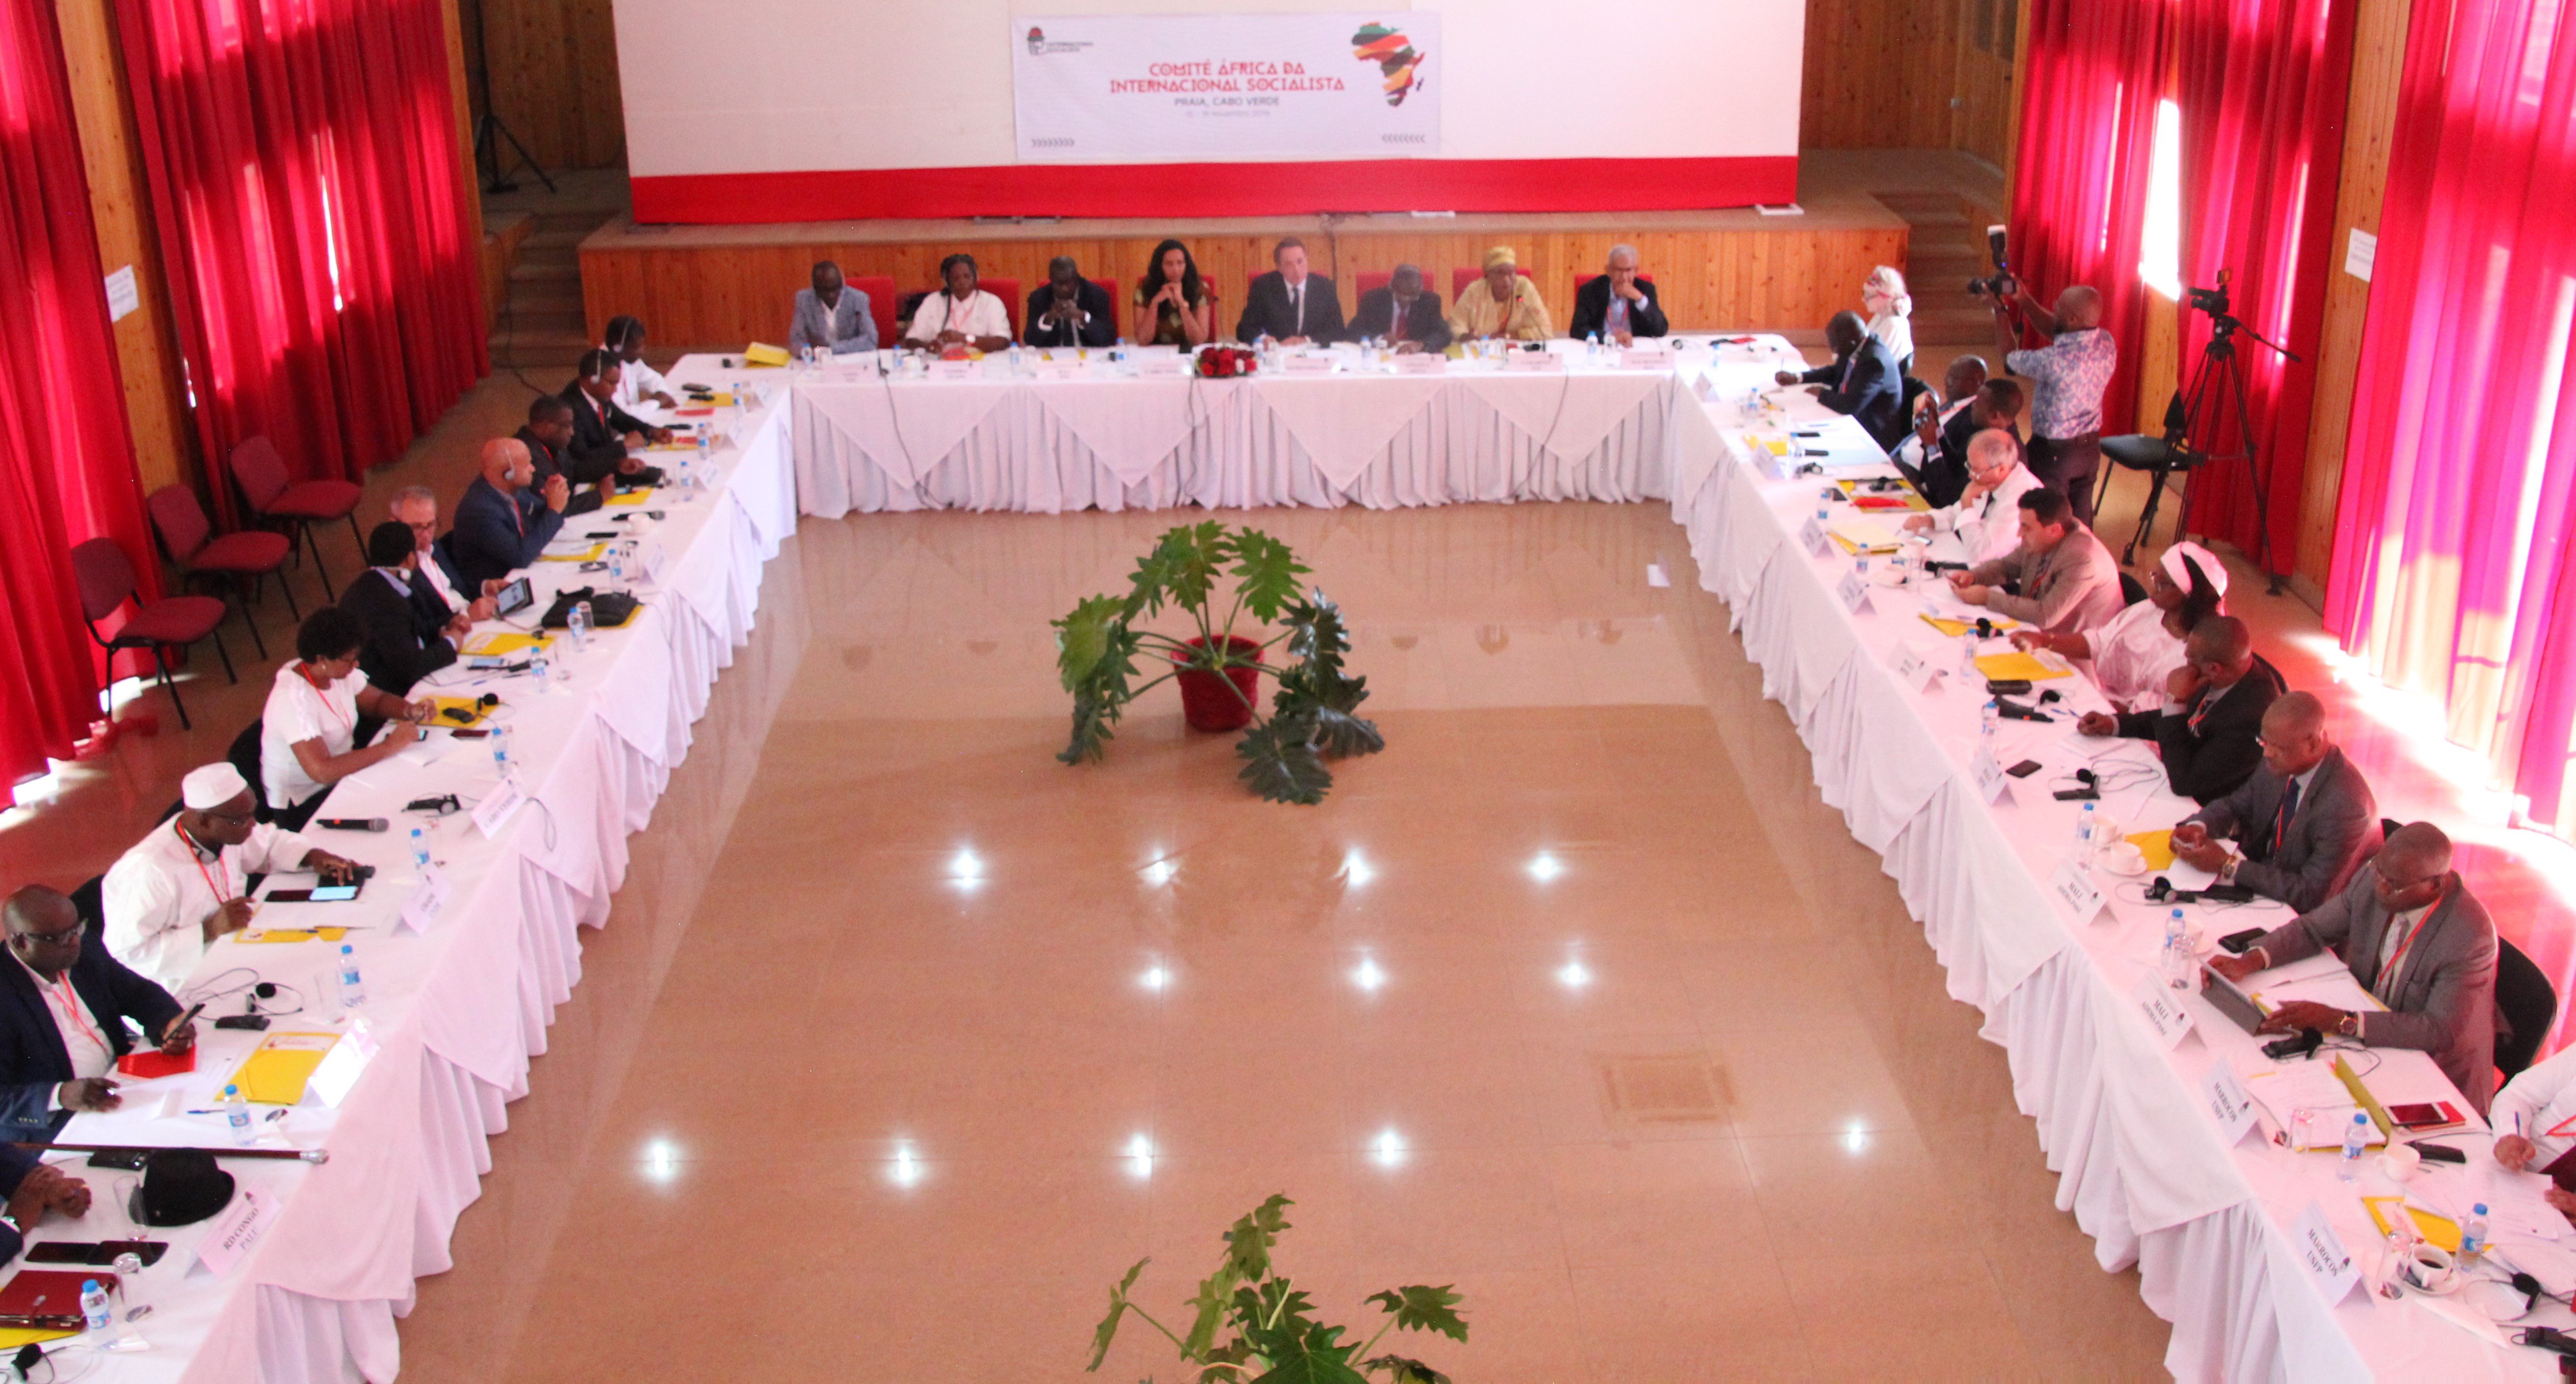 Meeting of the SI Africa Committee in Praia, Cabo Verde